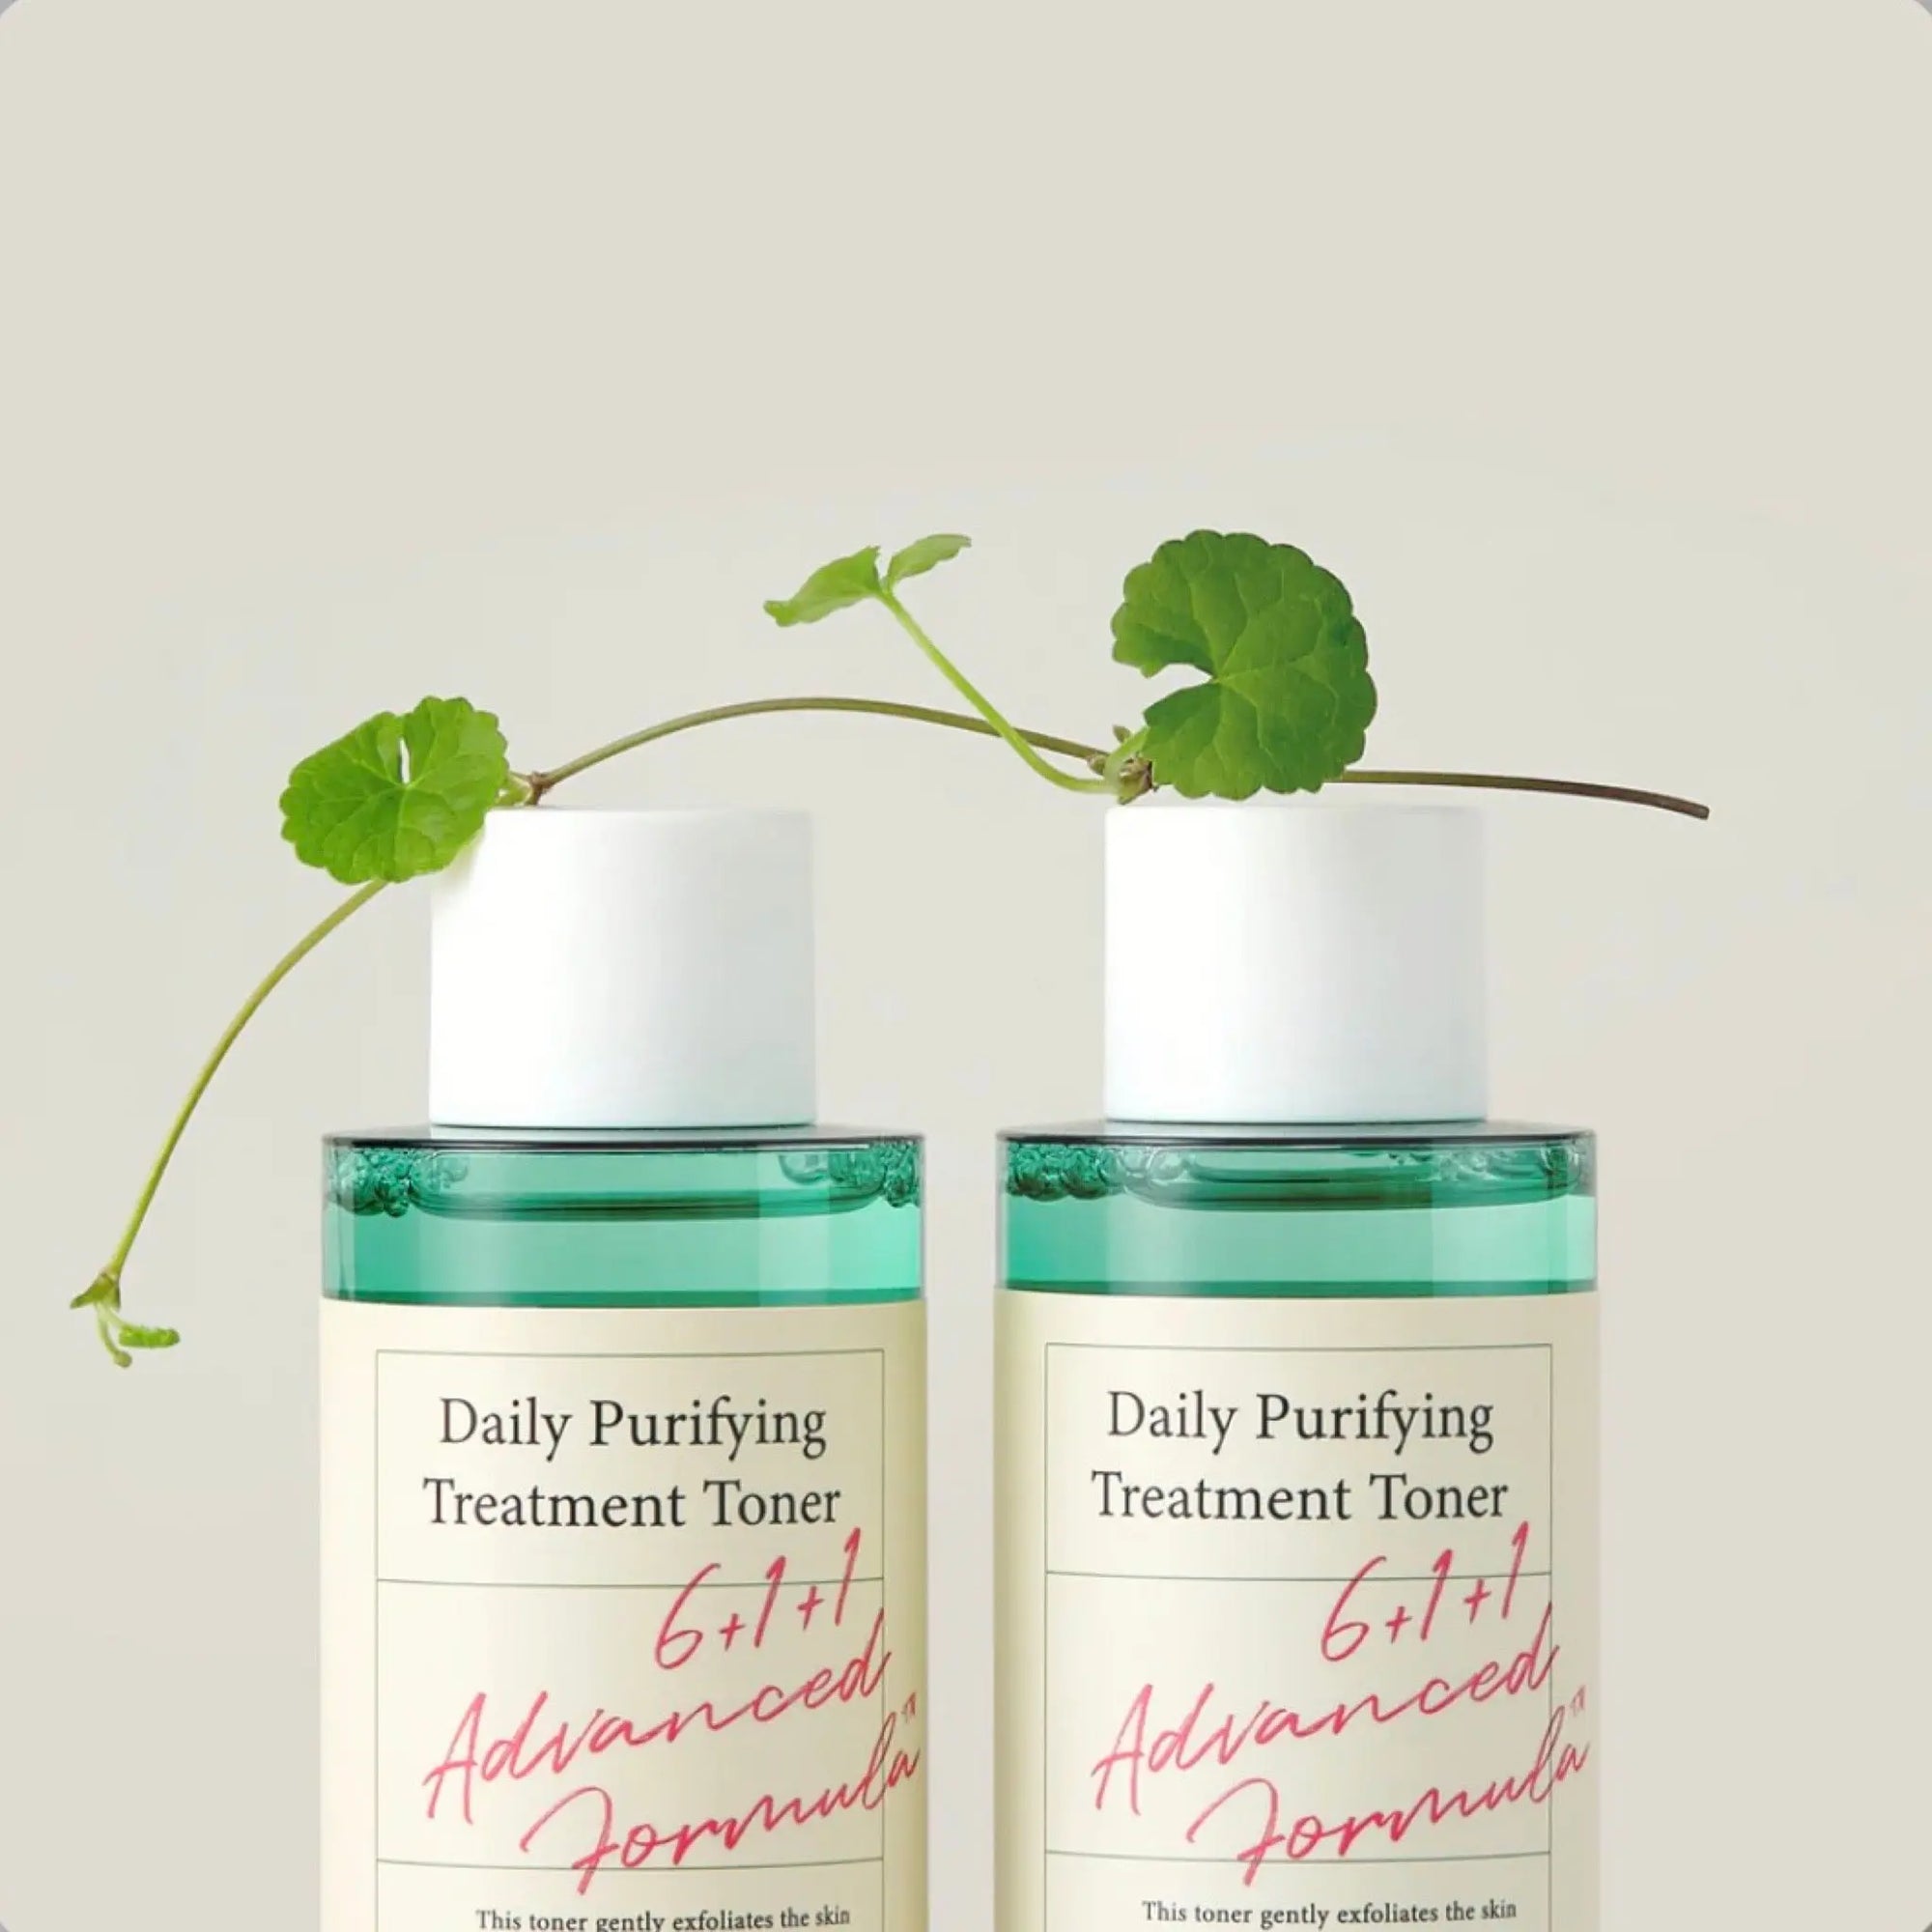 Axis-Y - Daily Purifying Treatment Toner 200mL Axis-Y